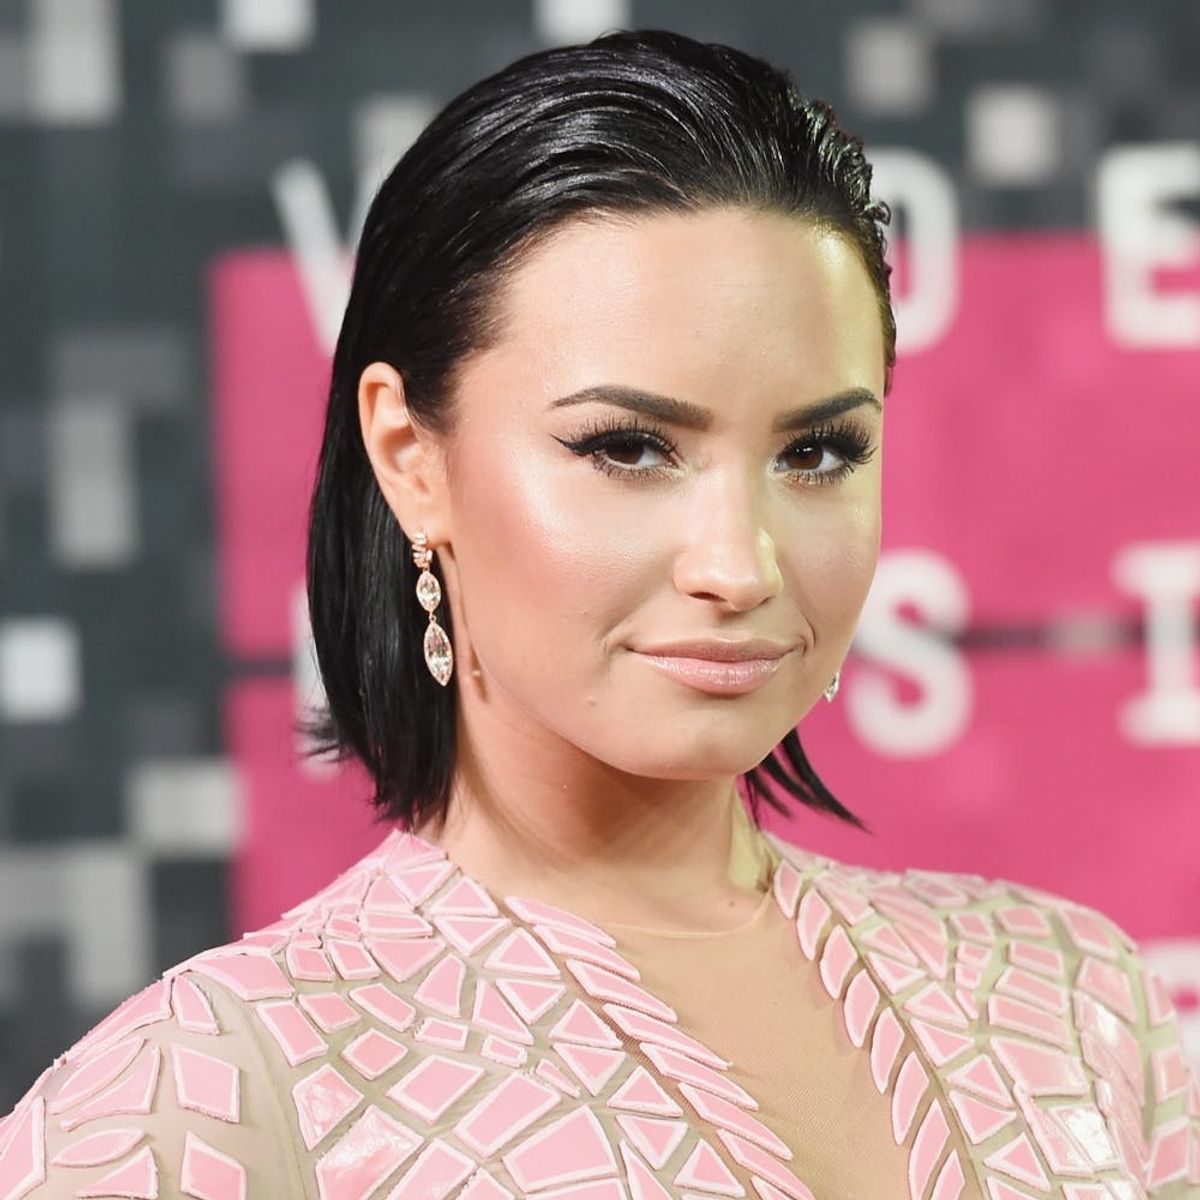 Demi Lovato’s Friends and Fans Send Love and Support After Hospitalization for Reported Overdose